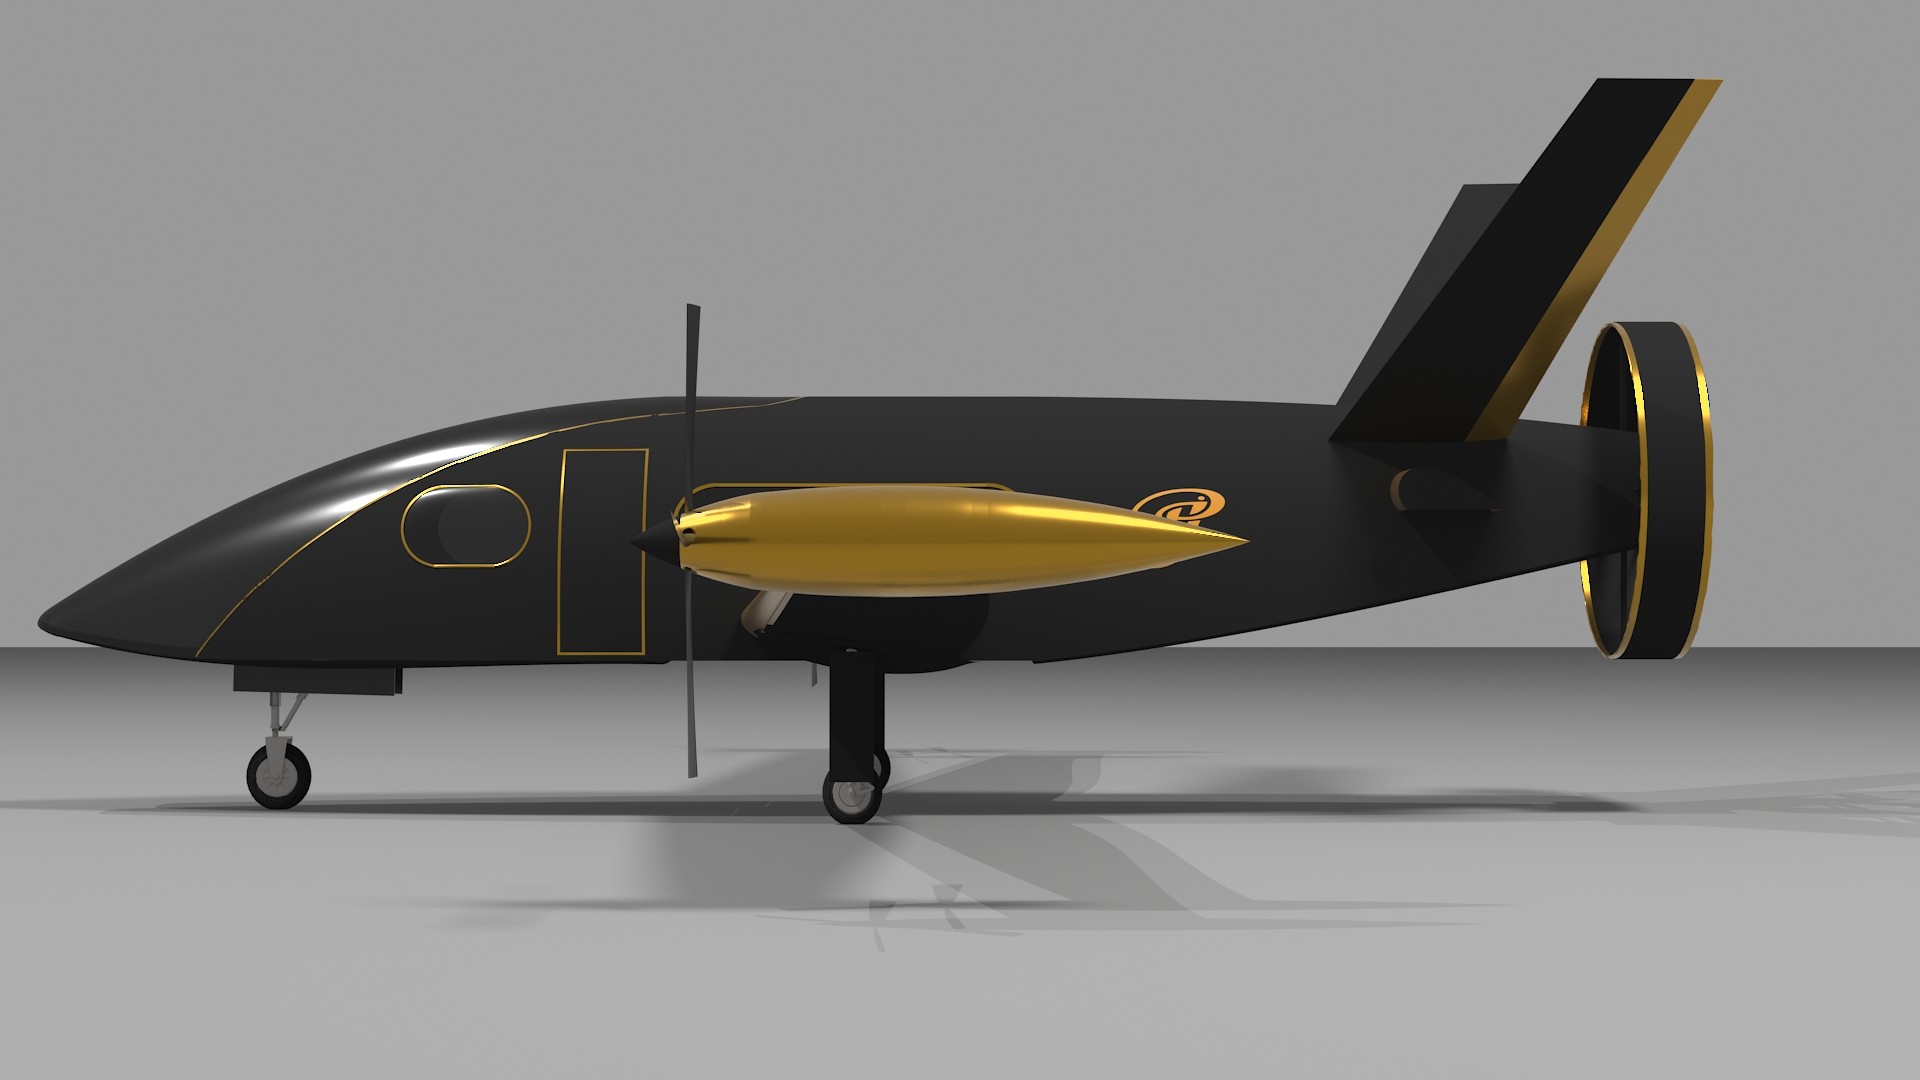 Panhwar Jet’s aim is to build an all-electric aircraft with maximum comfort and low operating costs 